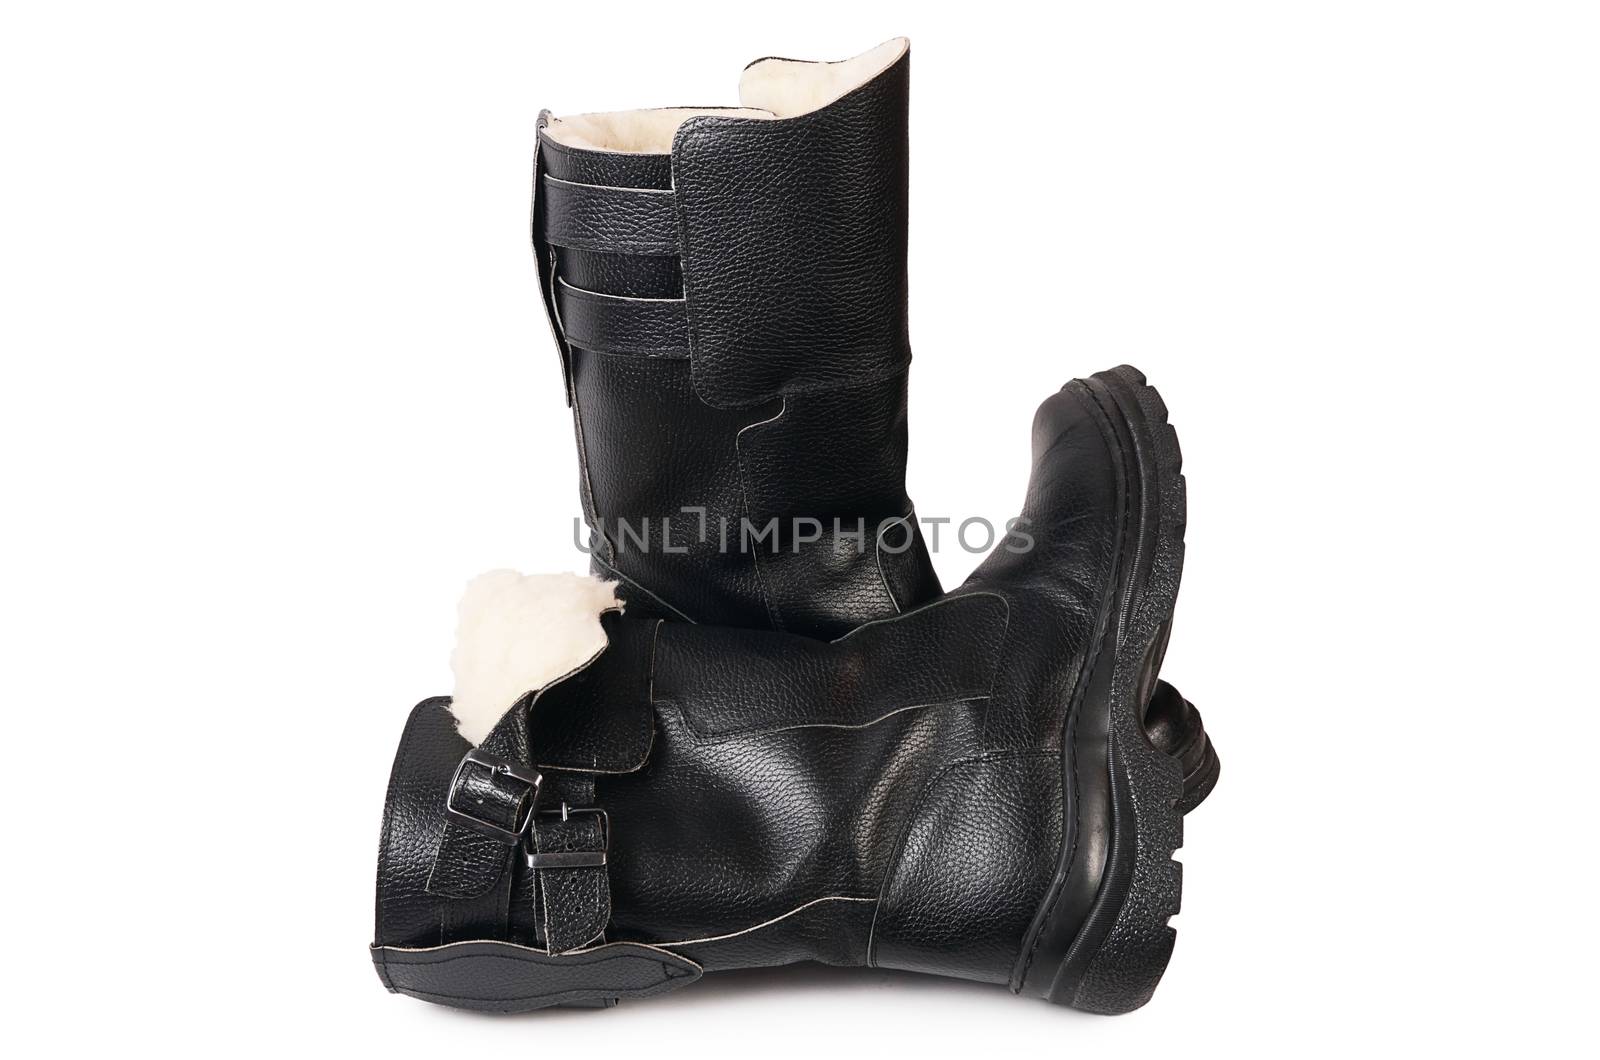 Mens black boots isolated on white background